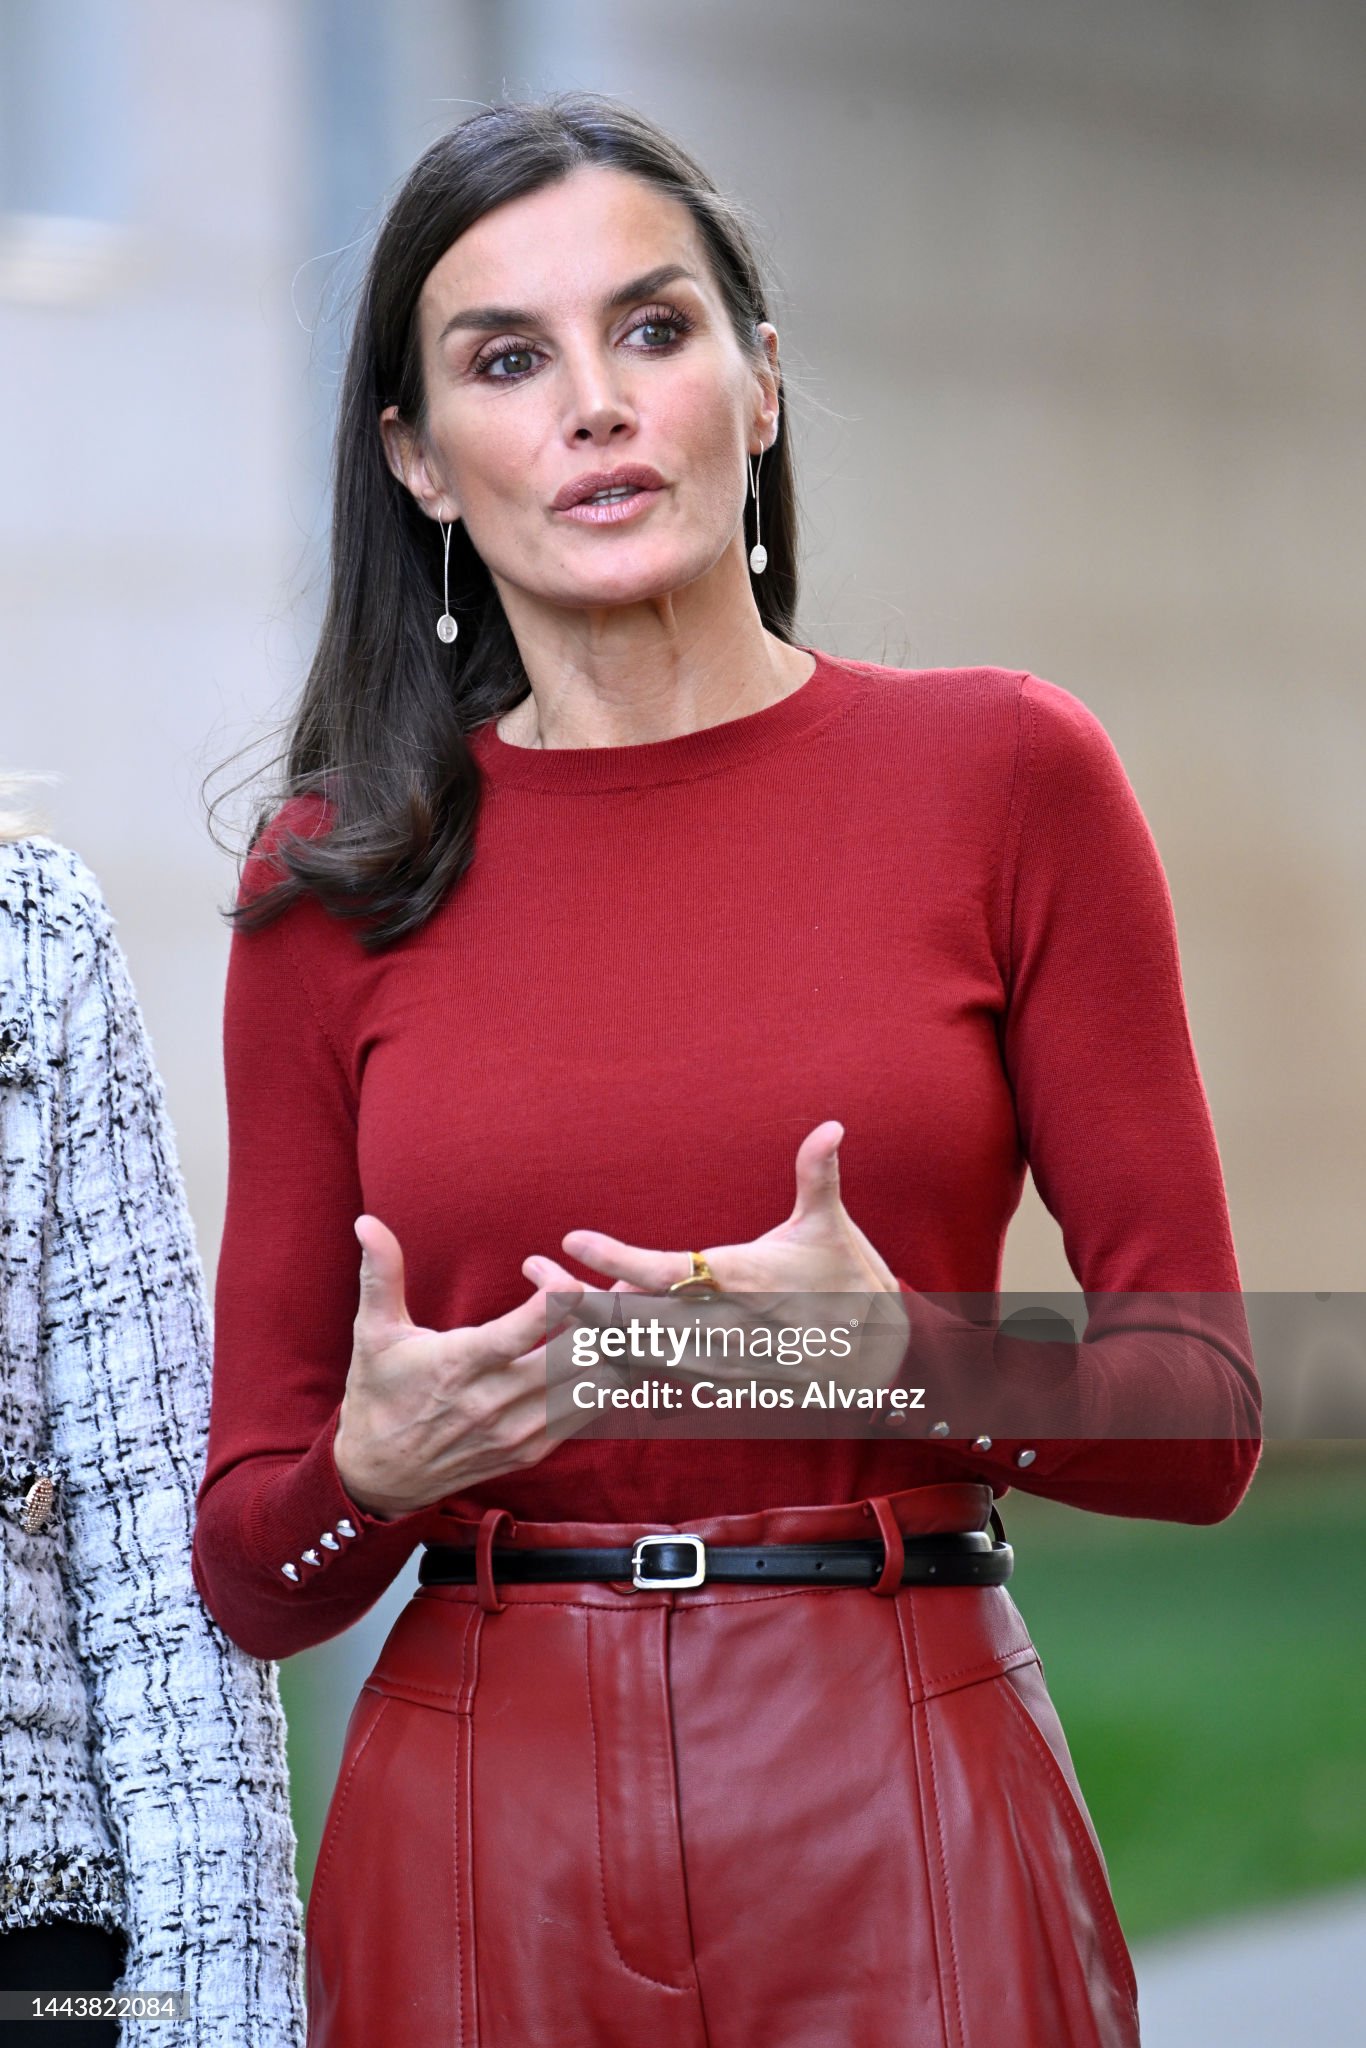 queen-letizia-of-spain-attends-events-related-to-mental-health-and-intellectual-disabilities.jpg?s=2048x2048&w=gi&k=20&c=QutdEn5Te05tZnFTxz0MvcaiBNwgBnsmFzGtJ6ej3IE=